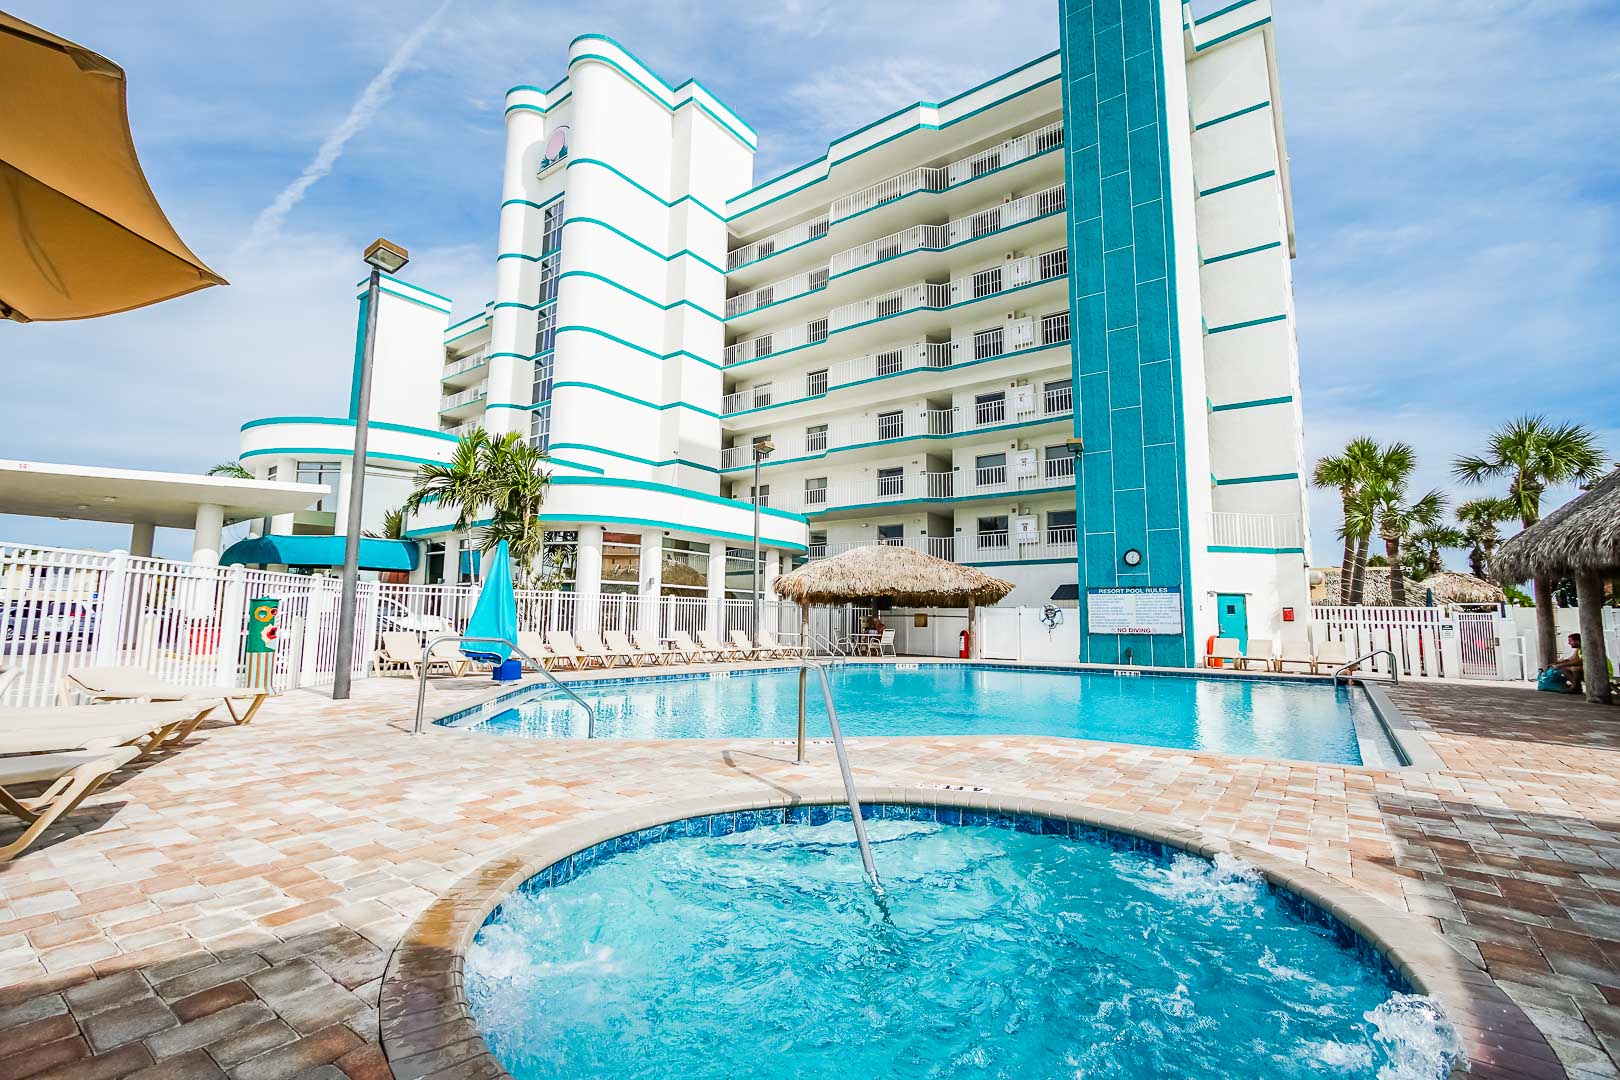 A crisp outdoor swimming pool and Jacuzzi at VRI's Discovery Beach Resort in Cocoa Beach, Florida.